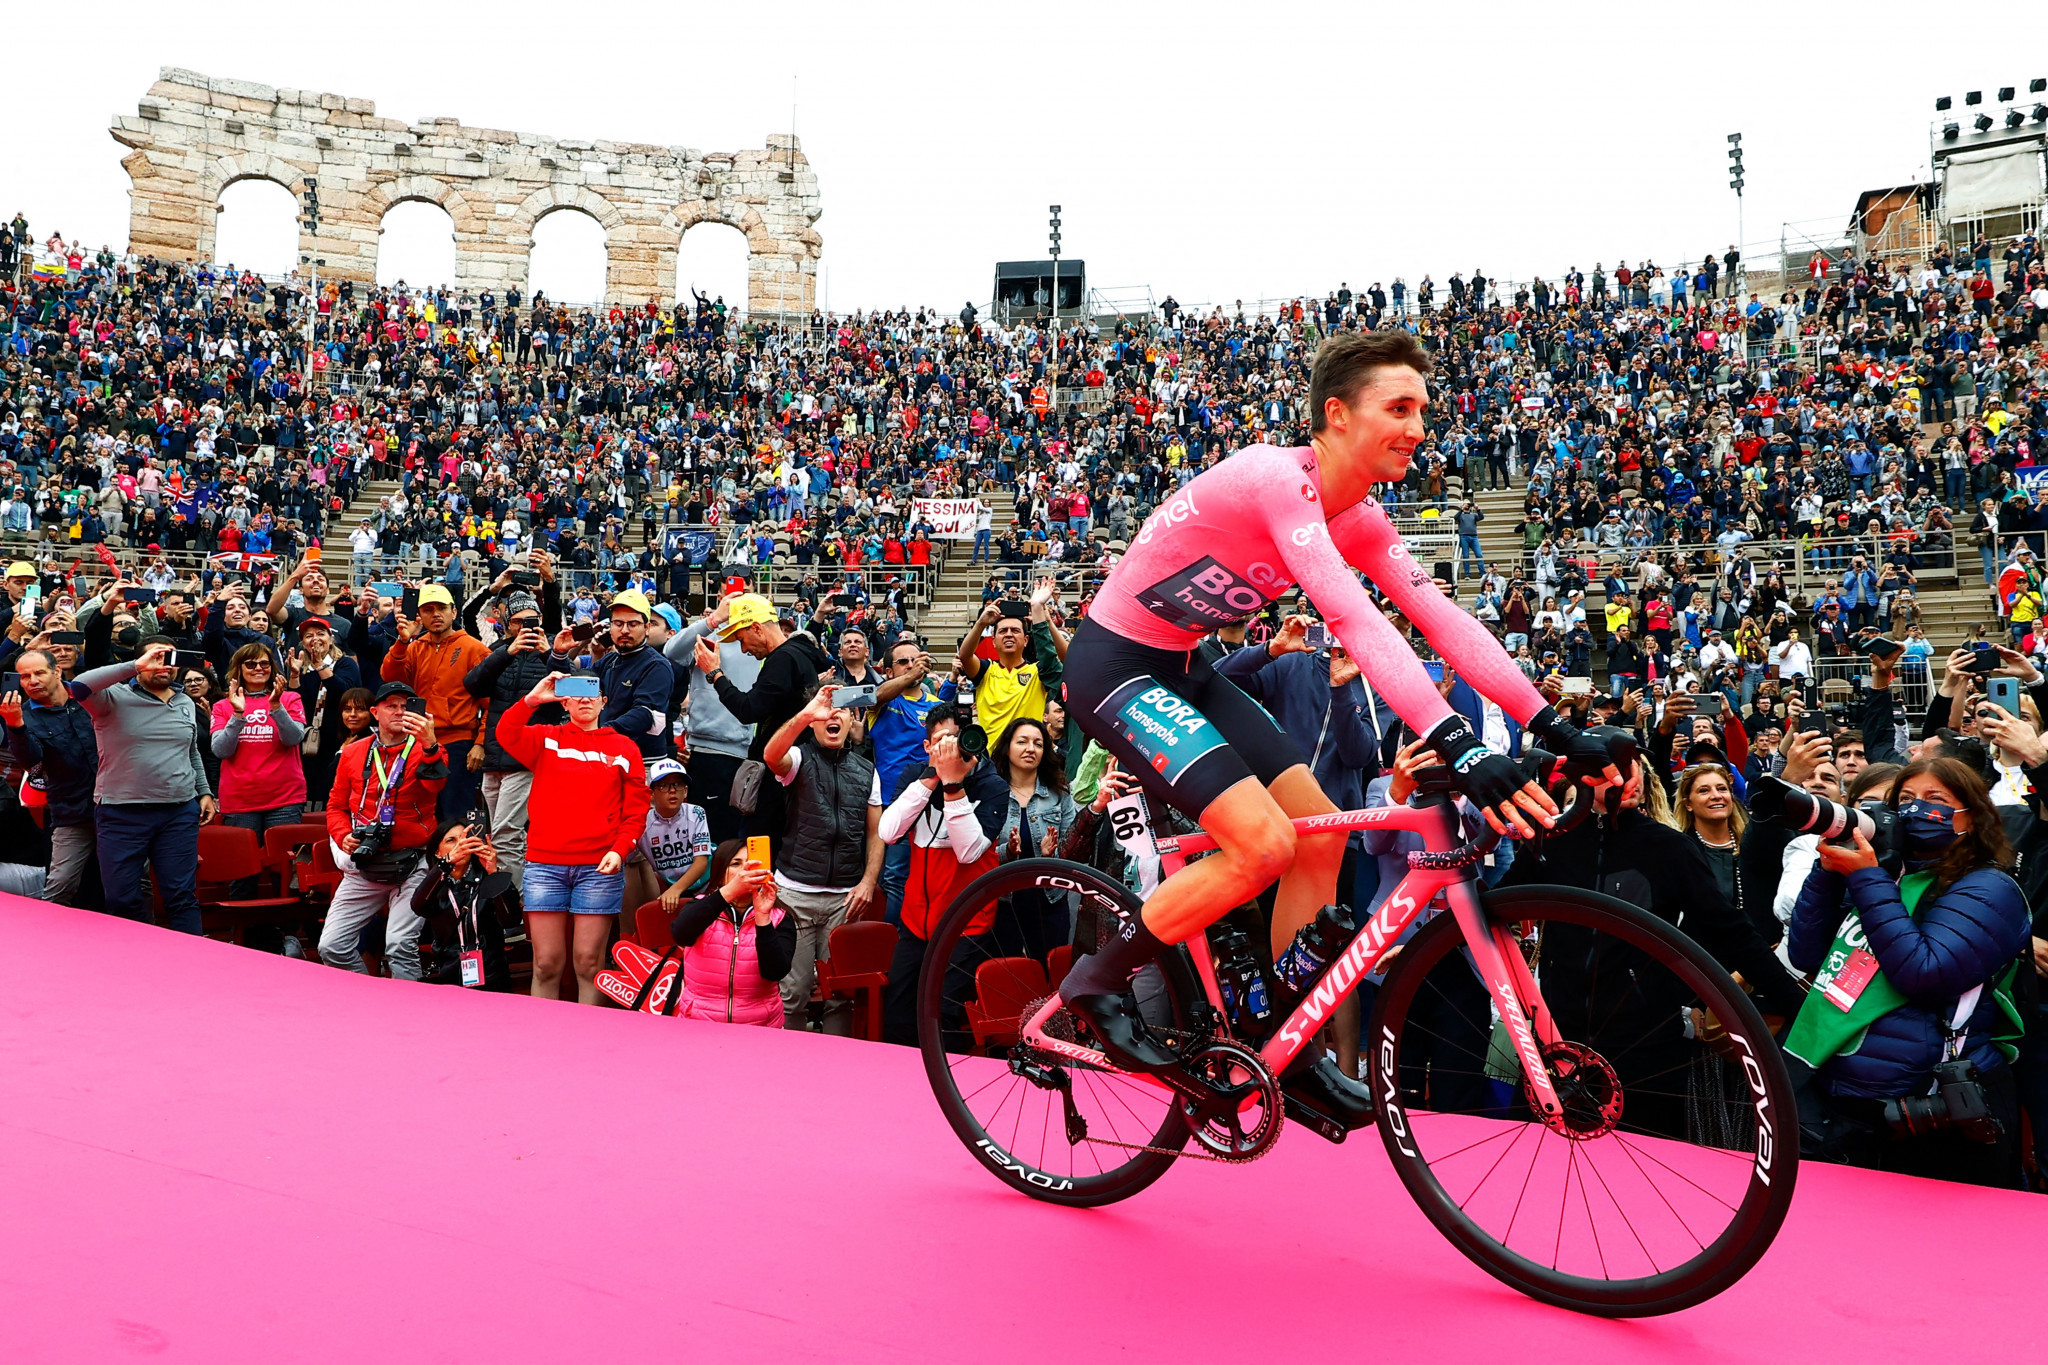 Hindley wraps up maiden Grand Tour victory at Giro d'Italia in Verona